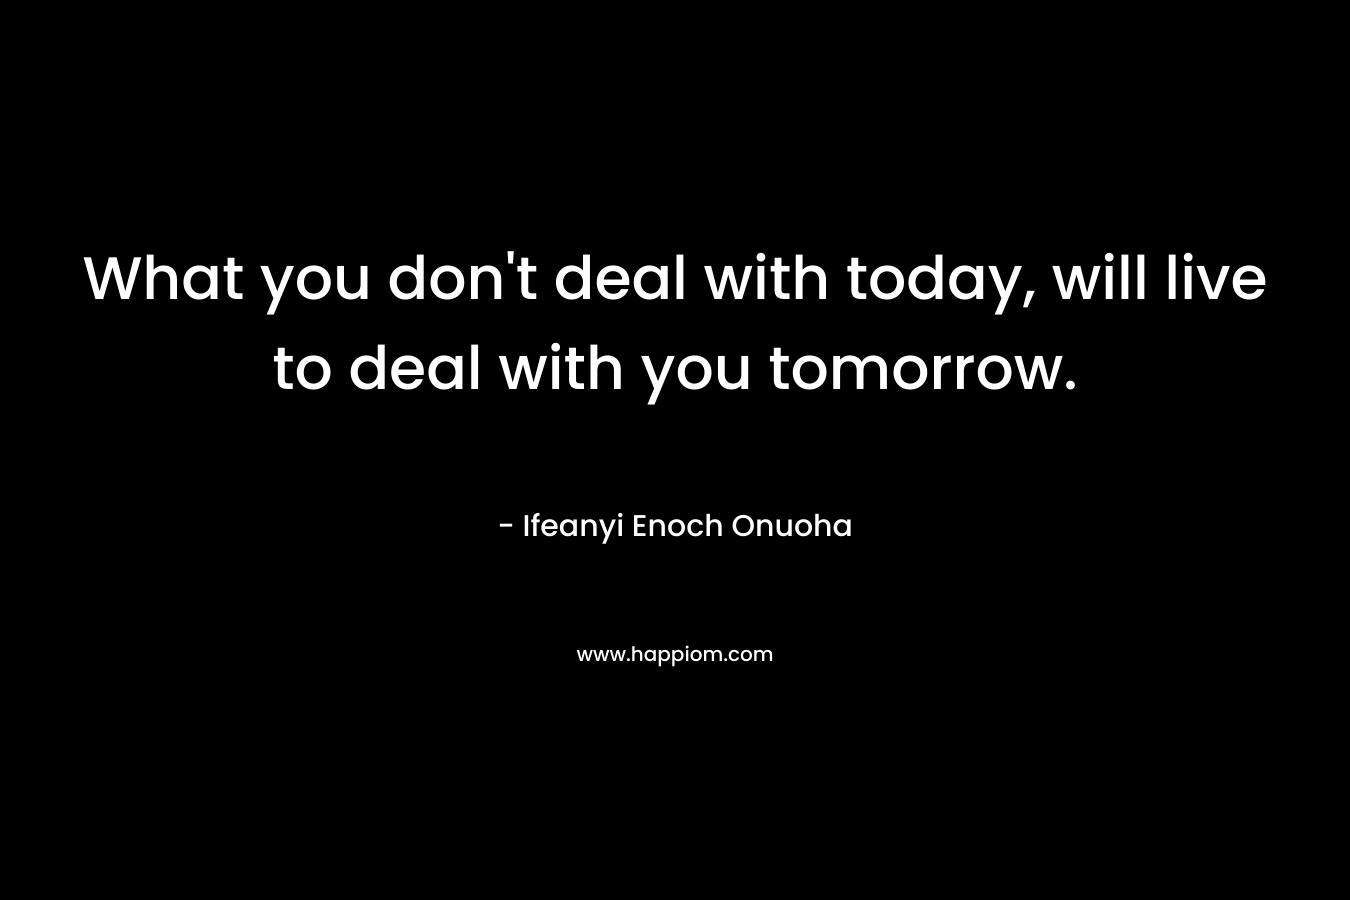 What you don't deal with today, will live to deal with you tomorrow.